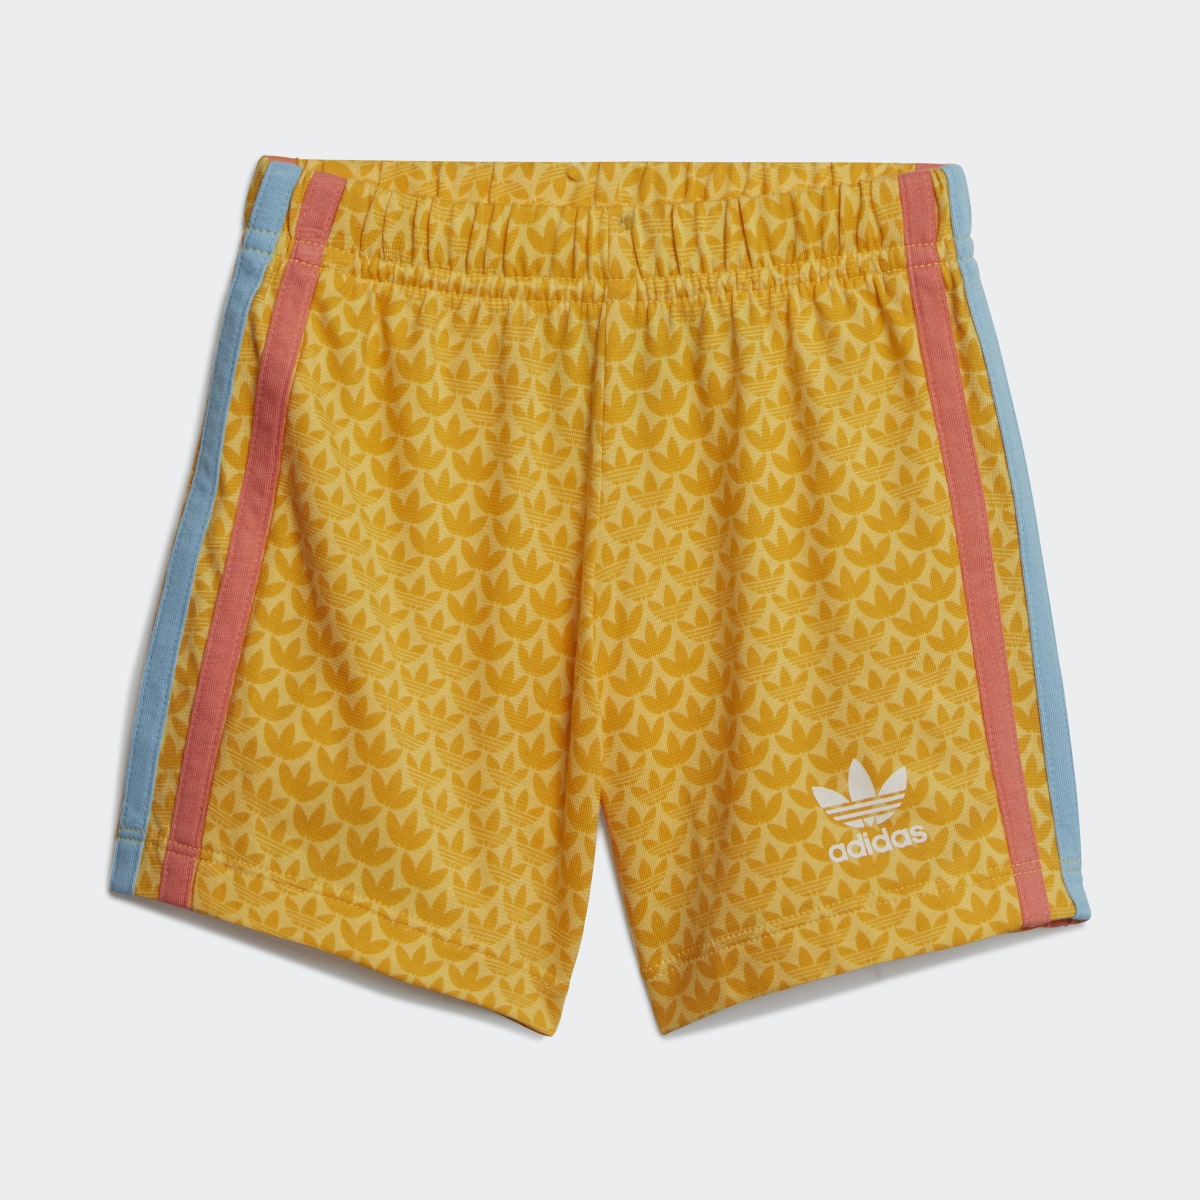 Adidas Completo Graphic Print Shorts and Tee. 5